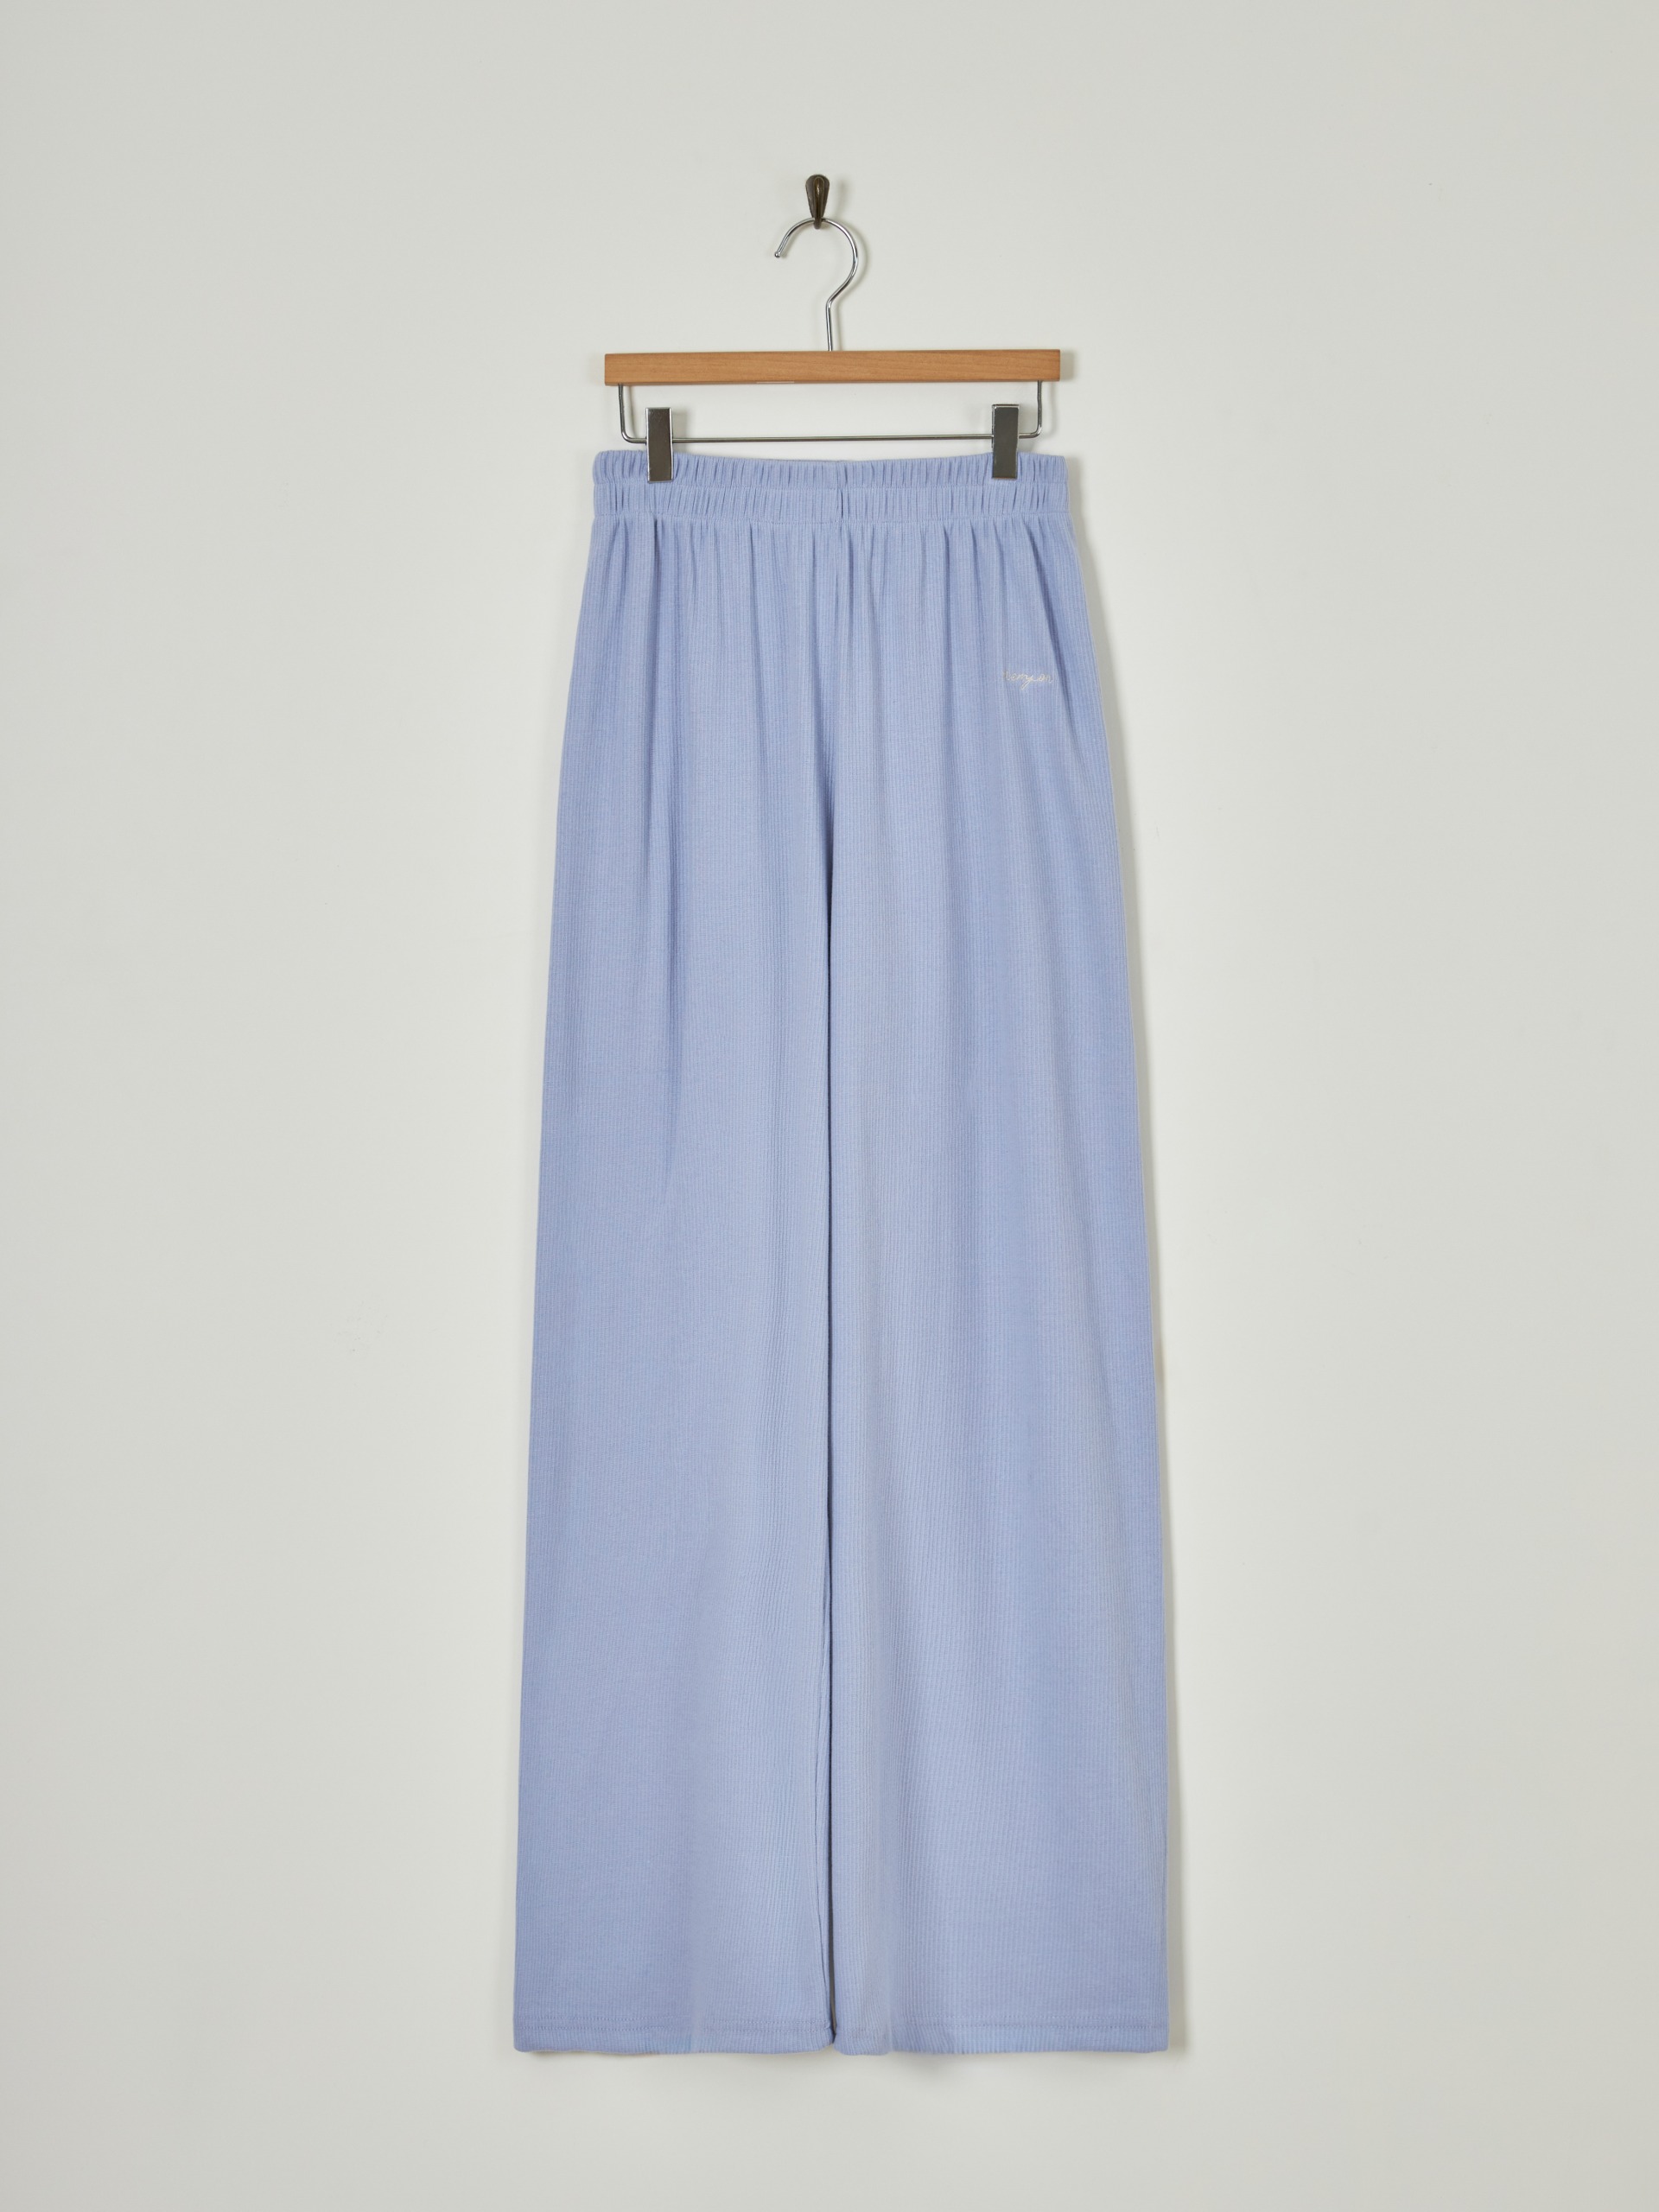 Barnet ribbed pants [SKY BLUE][Departure today]